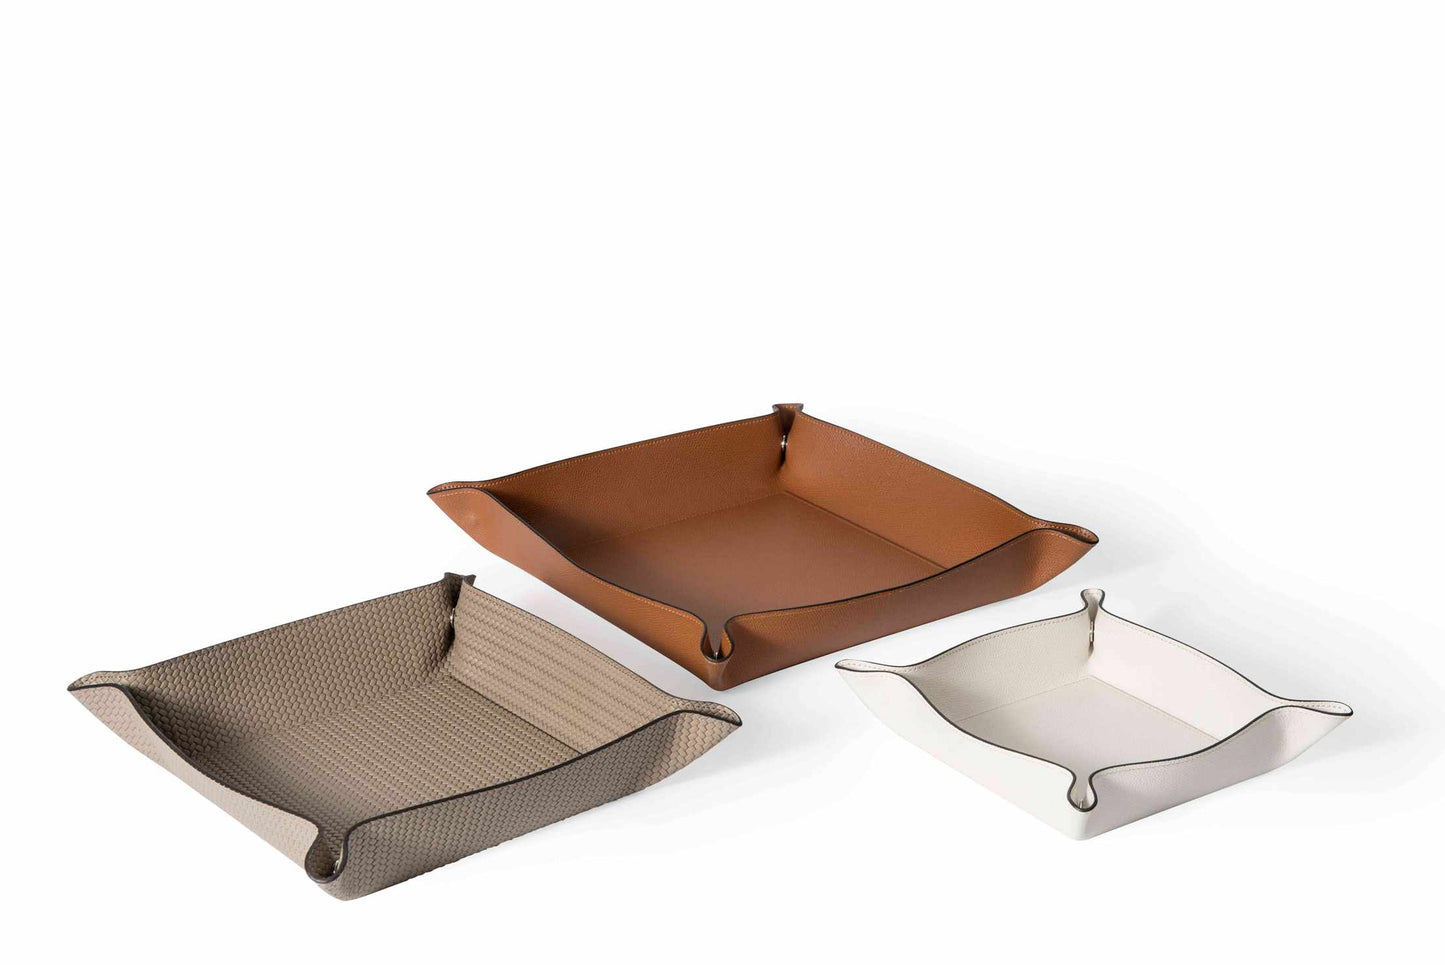 Pinetti Leather Trinket | Valet Tray With Semi-Hidden Fasteners | Trinket trays entirely made in leather | Features semi-hidden fasteners to allow flat storing | Explore Luxury Lifestyle Accessories at 2Jour Concierge, #1 luxury high-end gift & lifestyle shop